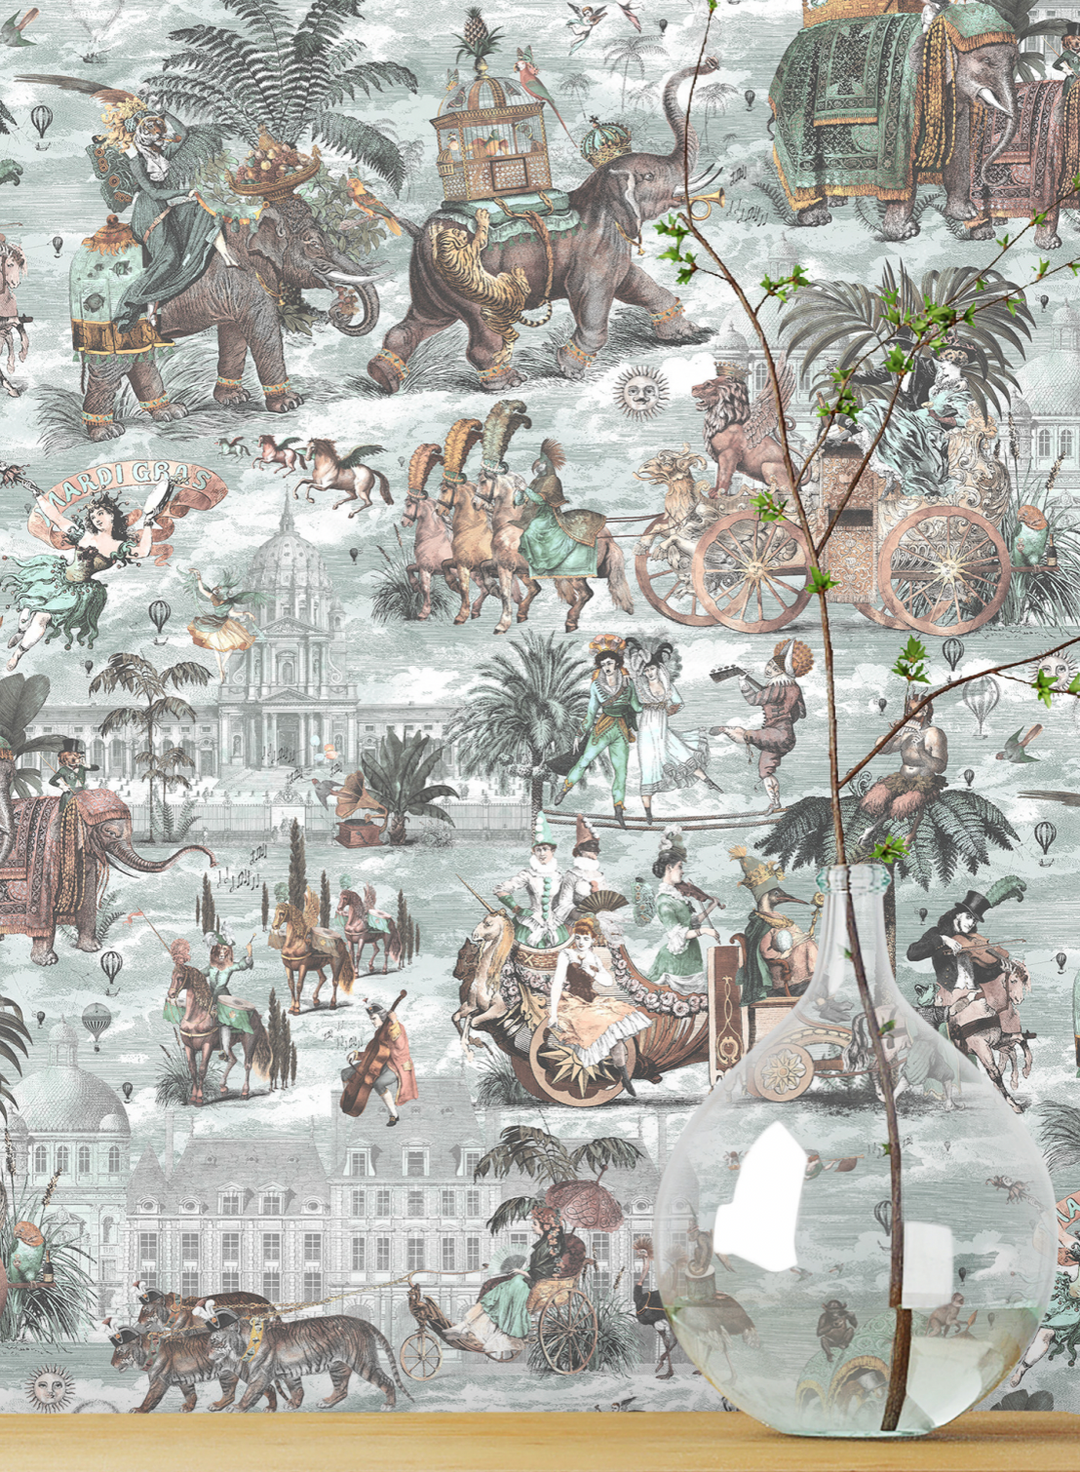 brand-mckenzie-carnival-fever-carnival-march-fiesta-whimsical-classical-wallpaper-wallcovering-seawater-peach